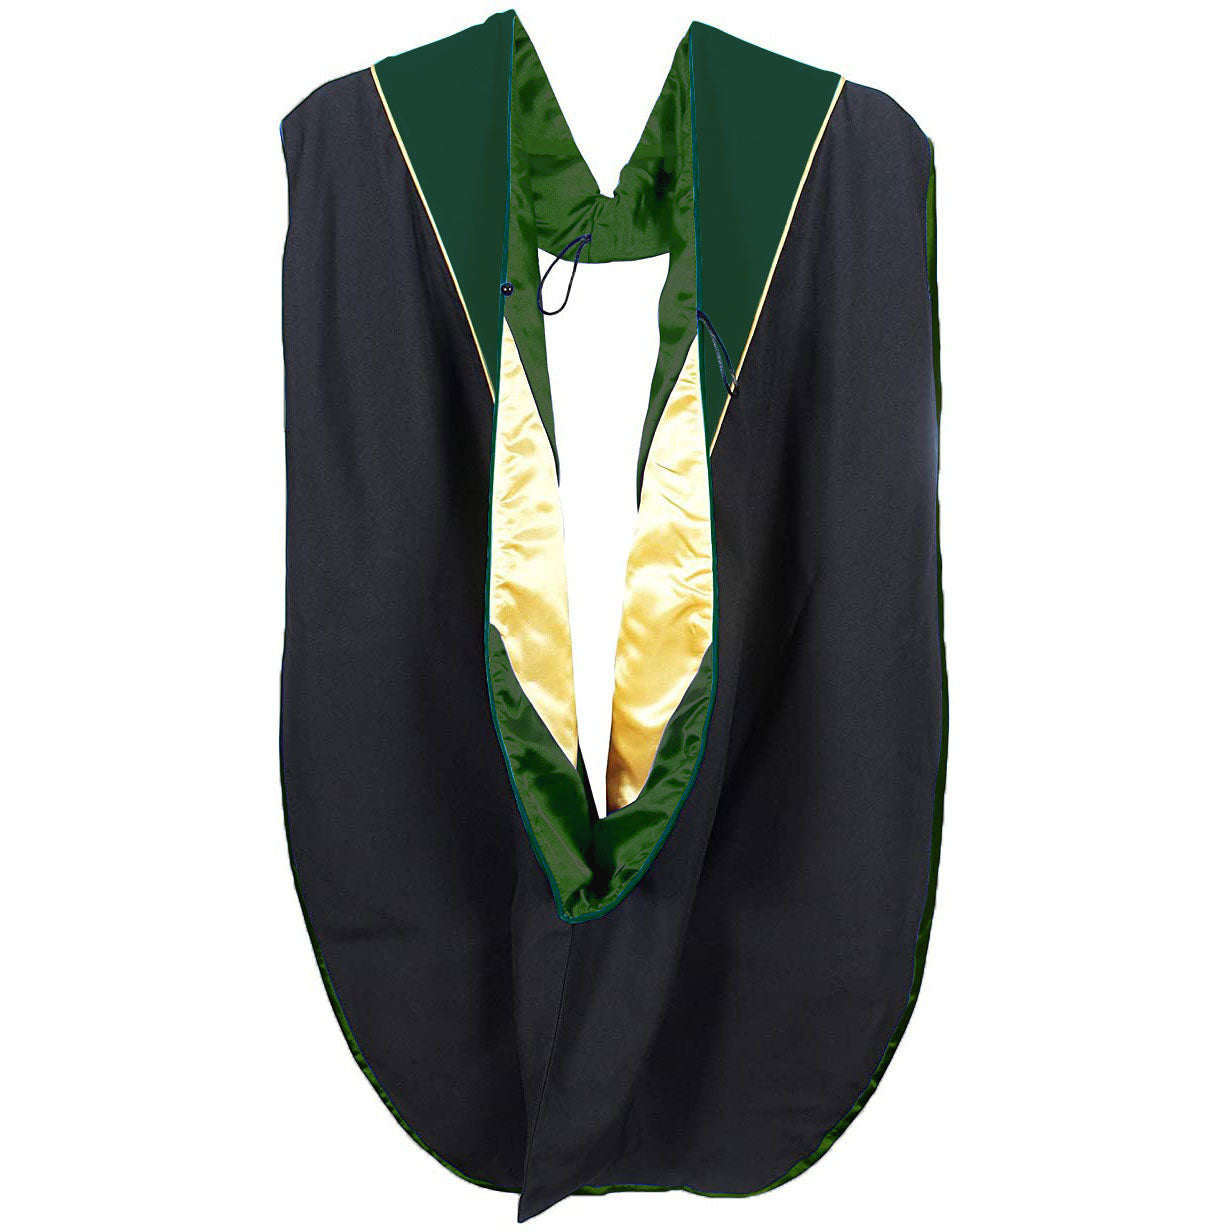 Doctorate Hood - Forest Green Velvet - Forest Green Lining - Gold Chevron - Gold Piping